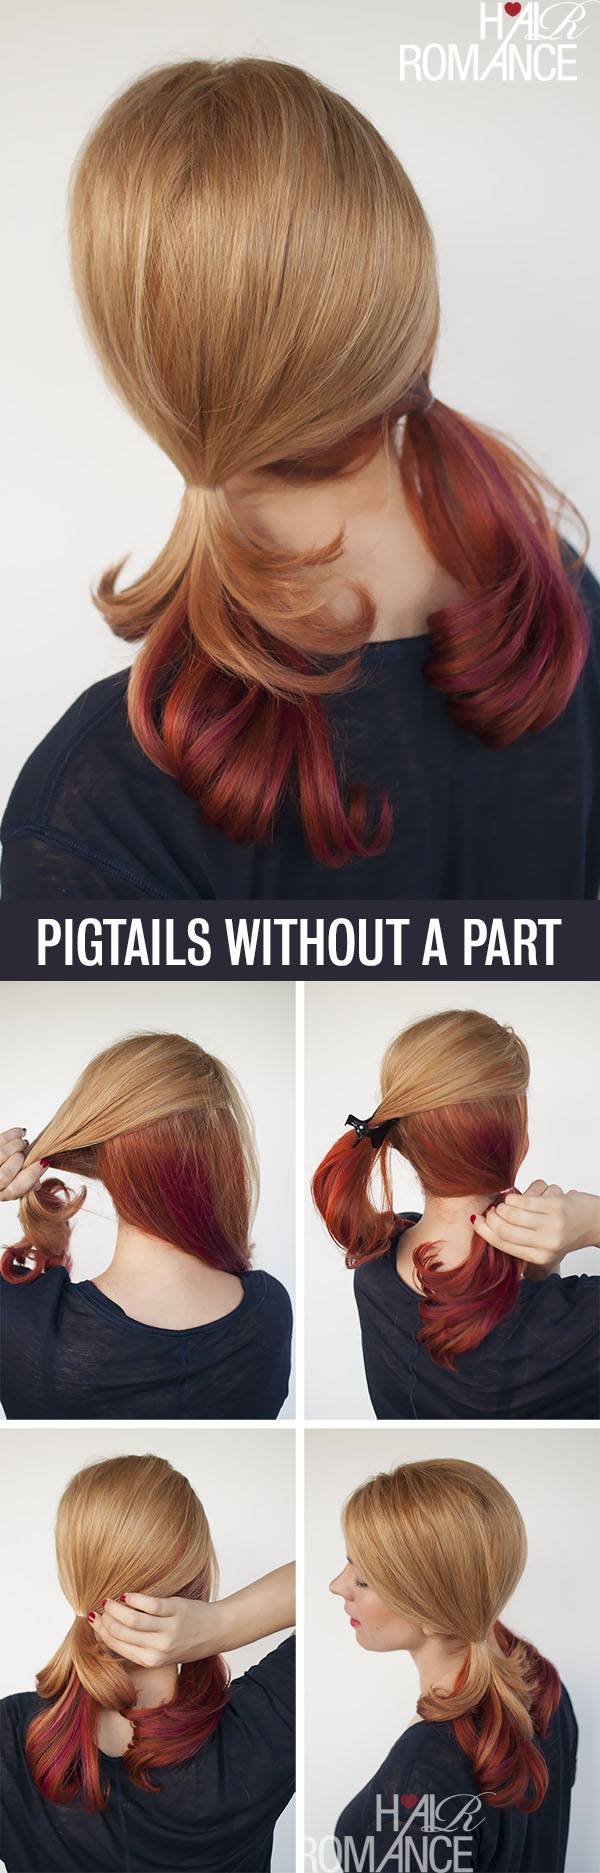 Hair-Romance-Hair-tutorial-for-pigtails-without-a-part